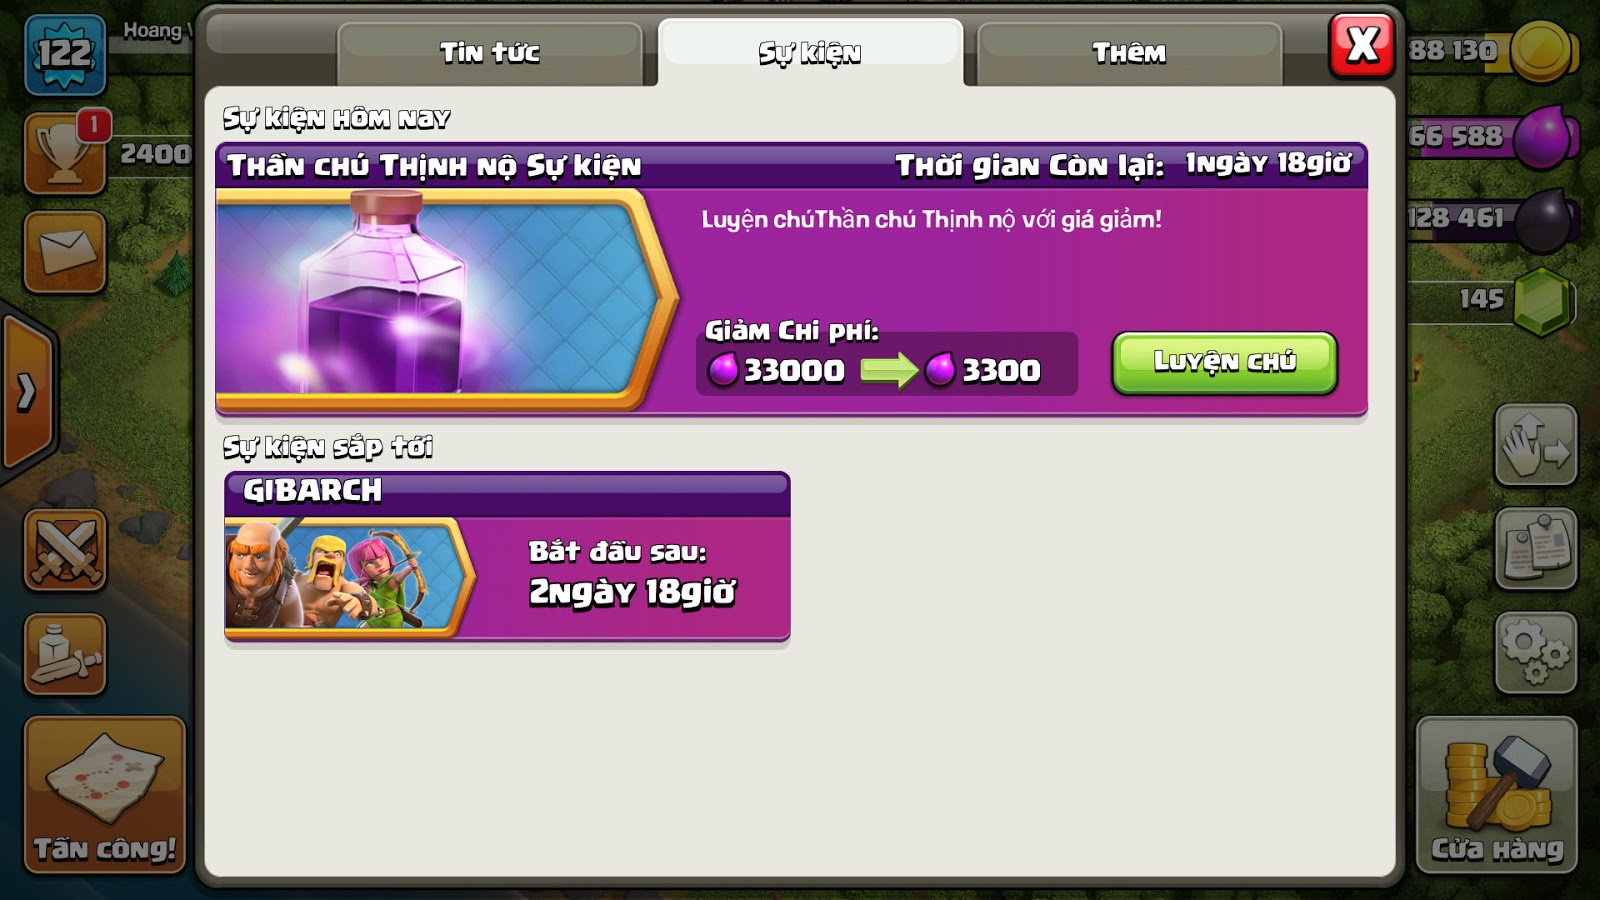 Event Discount 10% khi train Rage Spell Clash Of Clans.